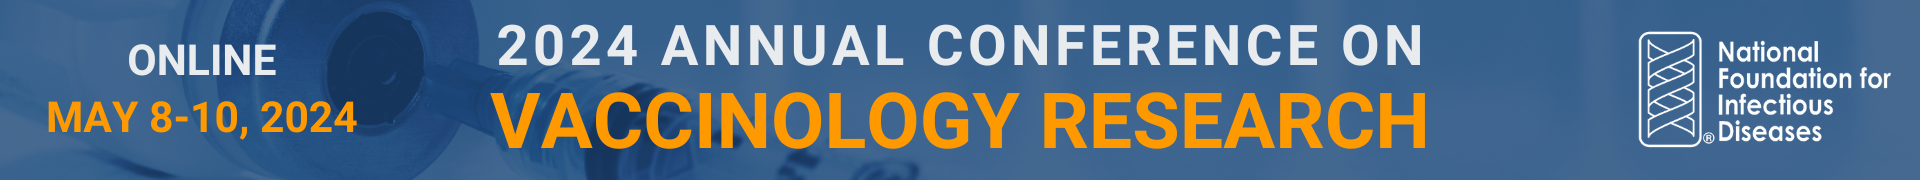 2023 Annual Conference on Vaccinology Research (June 5-6, 2023)